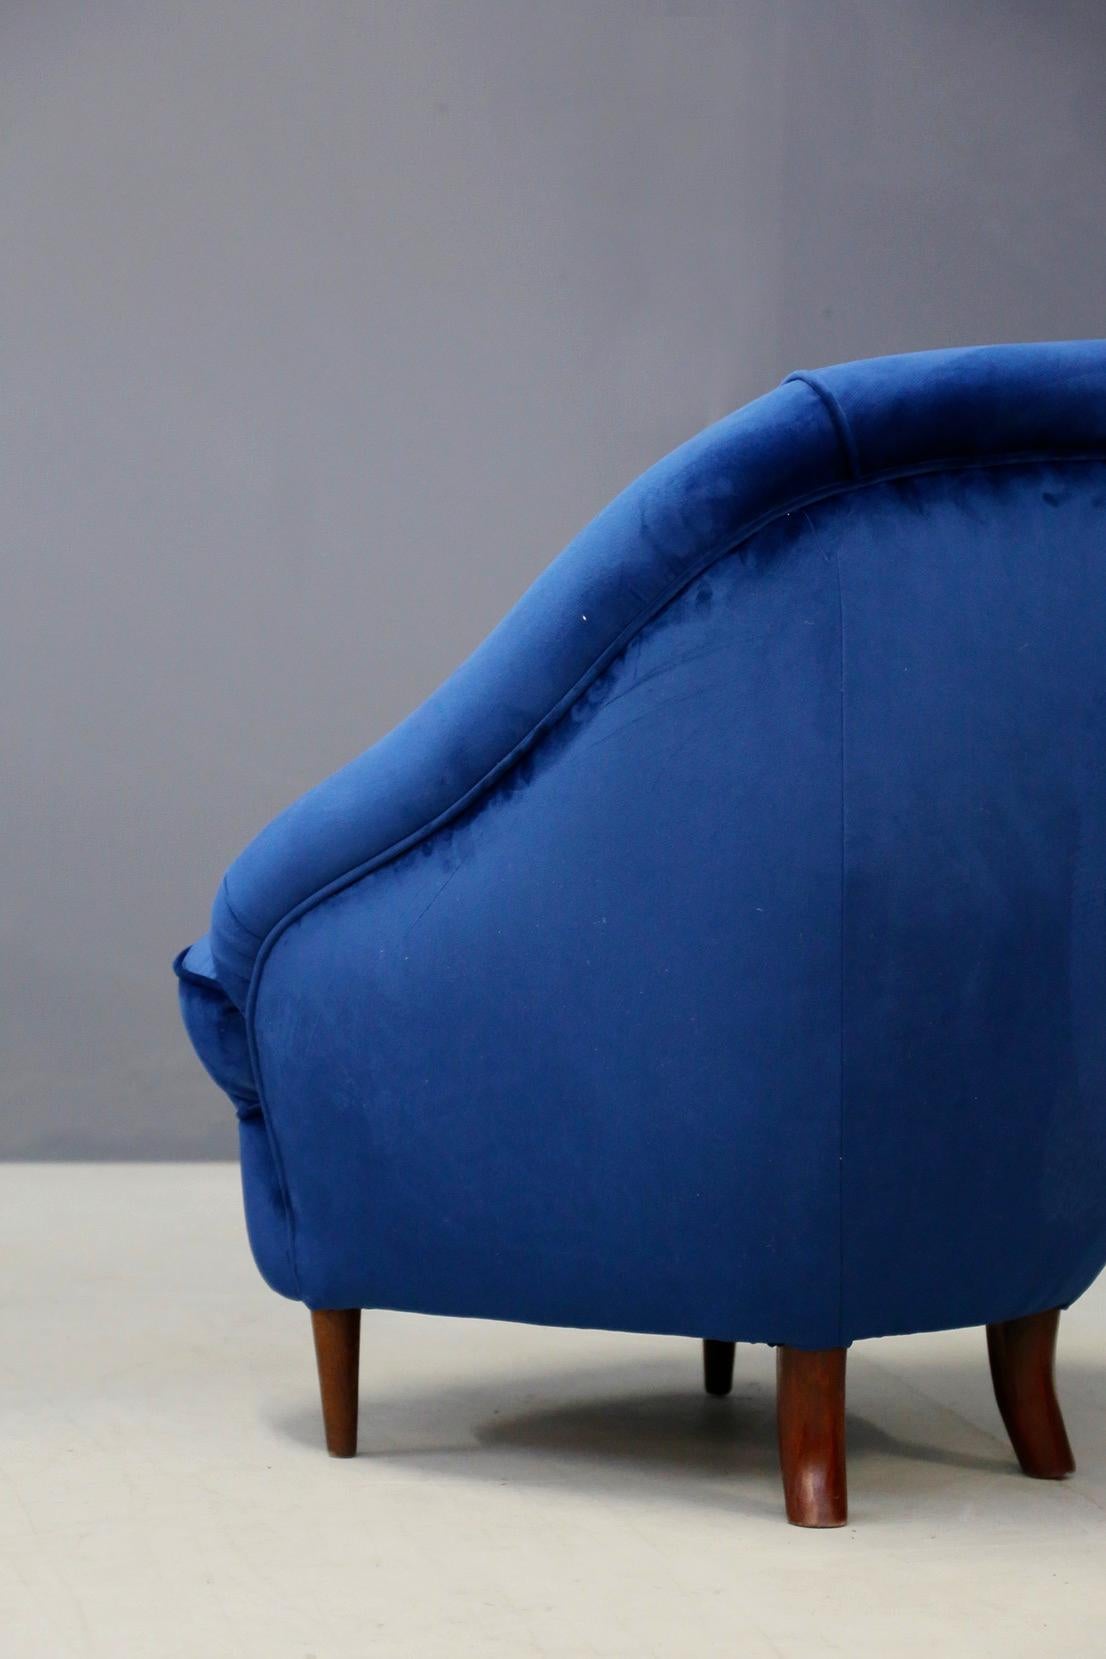 Beautiful pair of armchairs from the 1930s by Gio Ponti. The armchairs have been restored in blue Italian velvet. Curved armchairs upholstered in antique velvet with Italian walnut legs. The pair of armchairs. Antiqued velvet upholstered curved